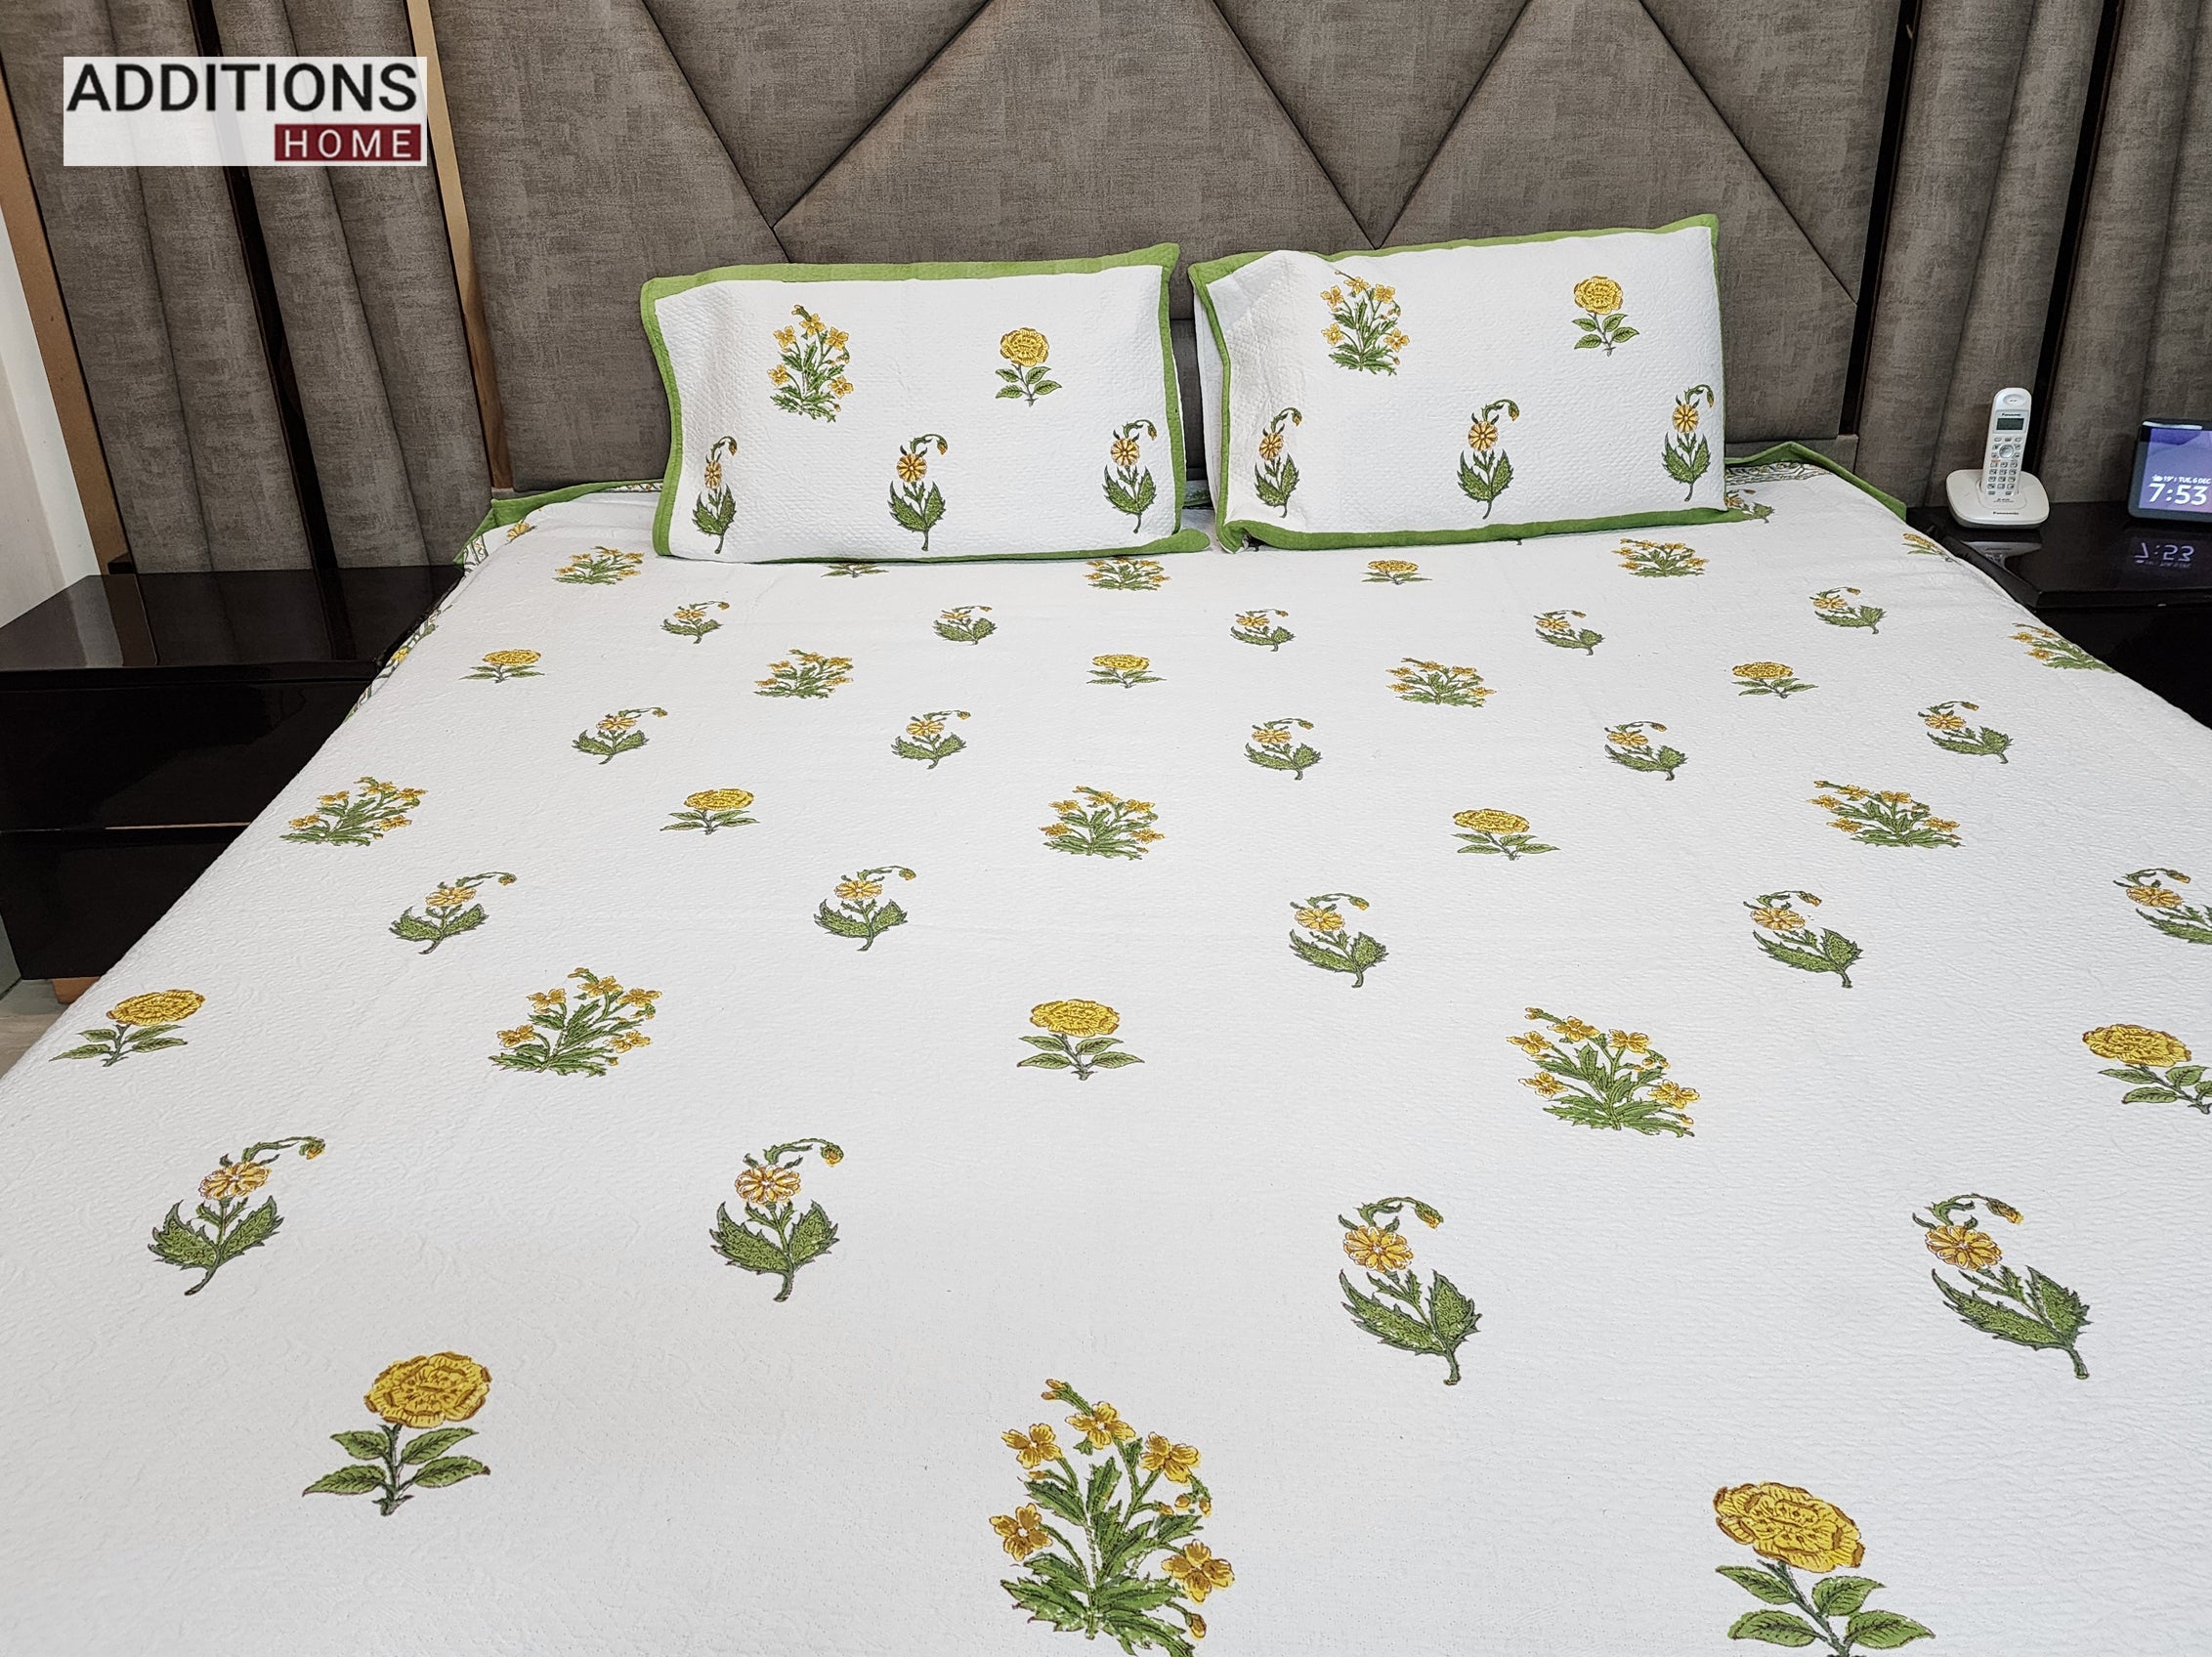 Mysore Hand Block Printed Jacquard Bed Cover with complementing Pillow Covers, 108x108